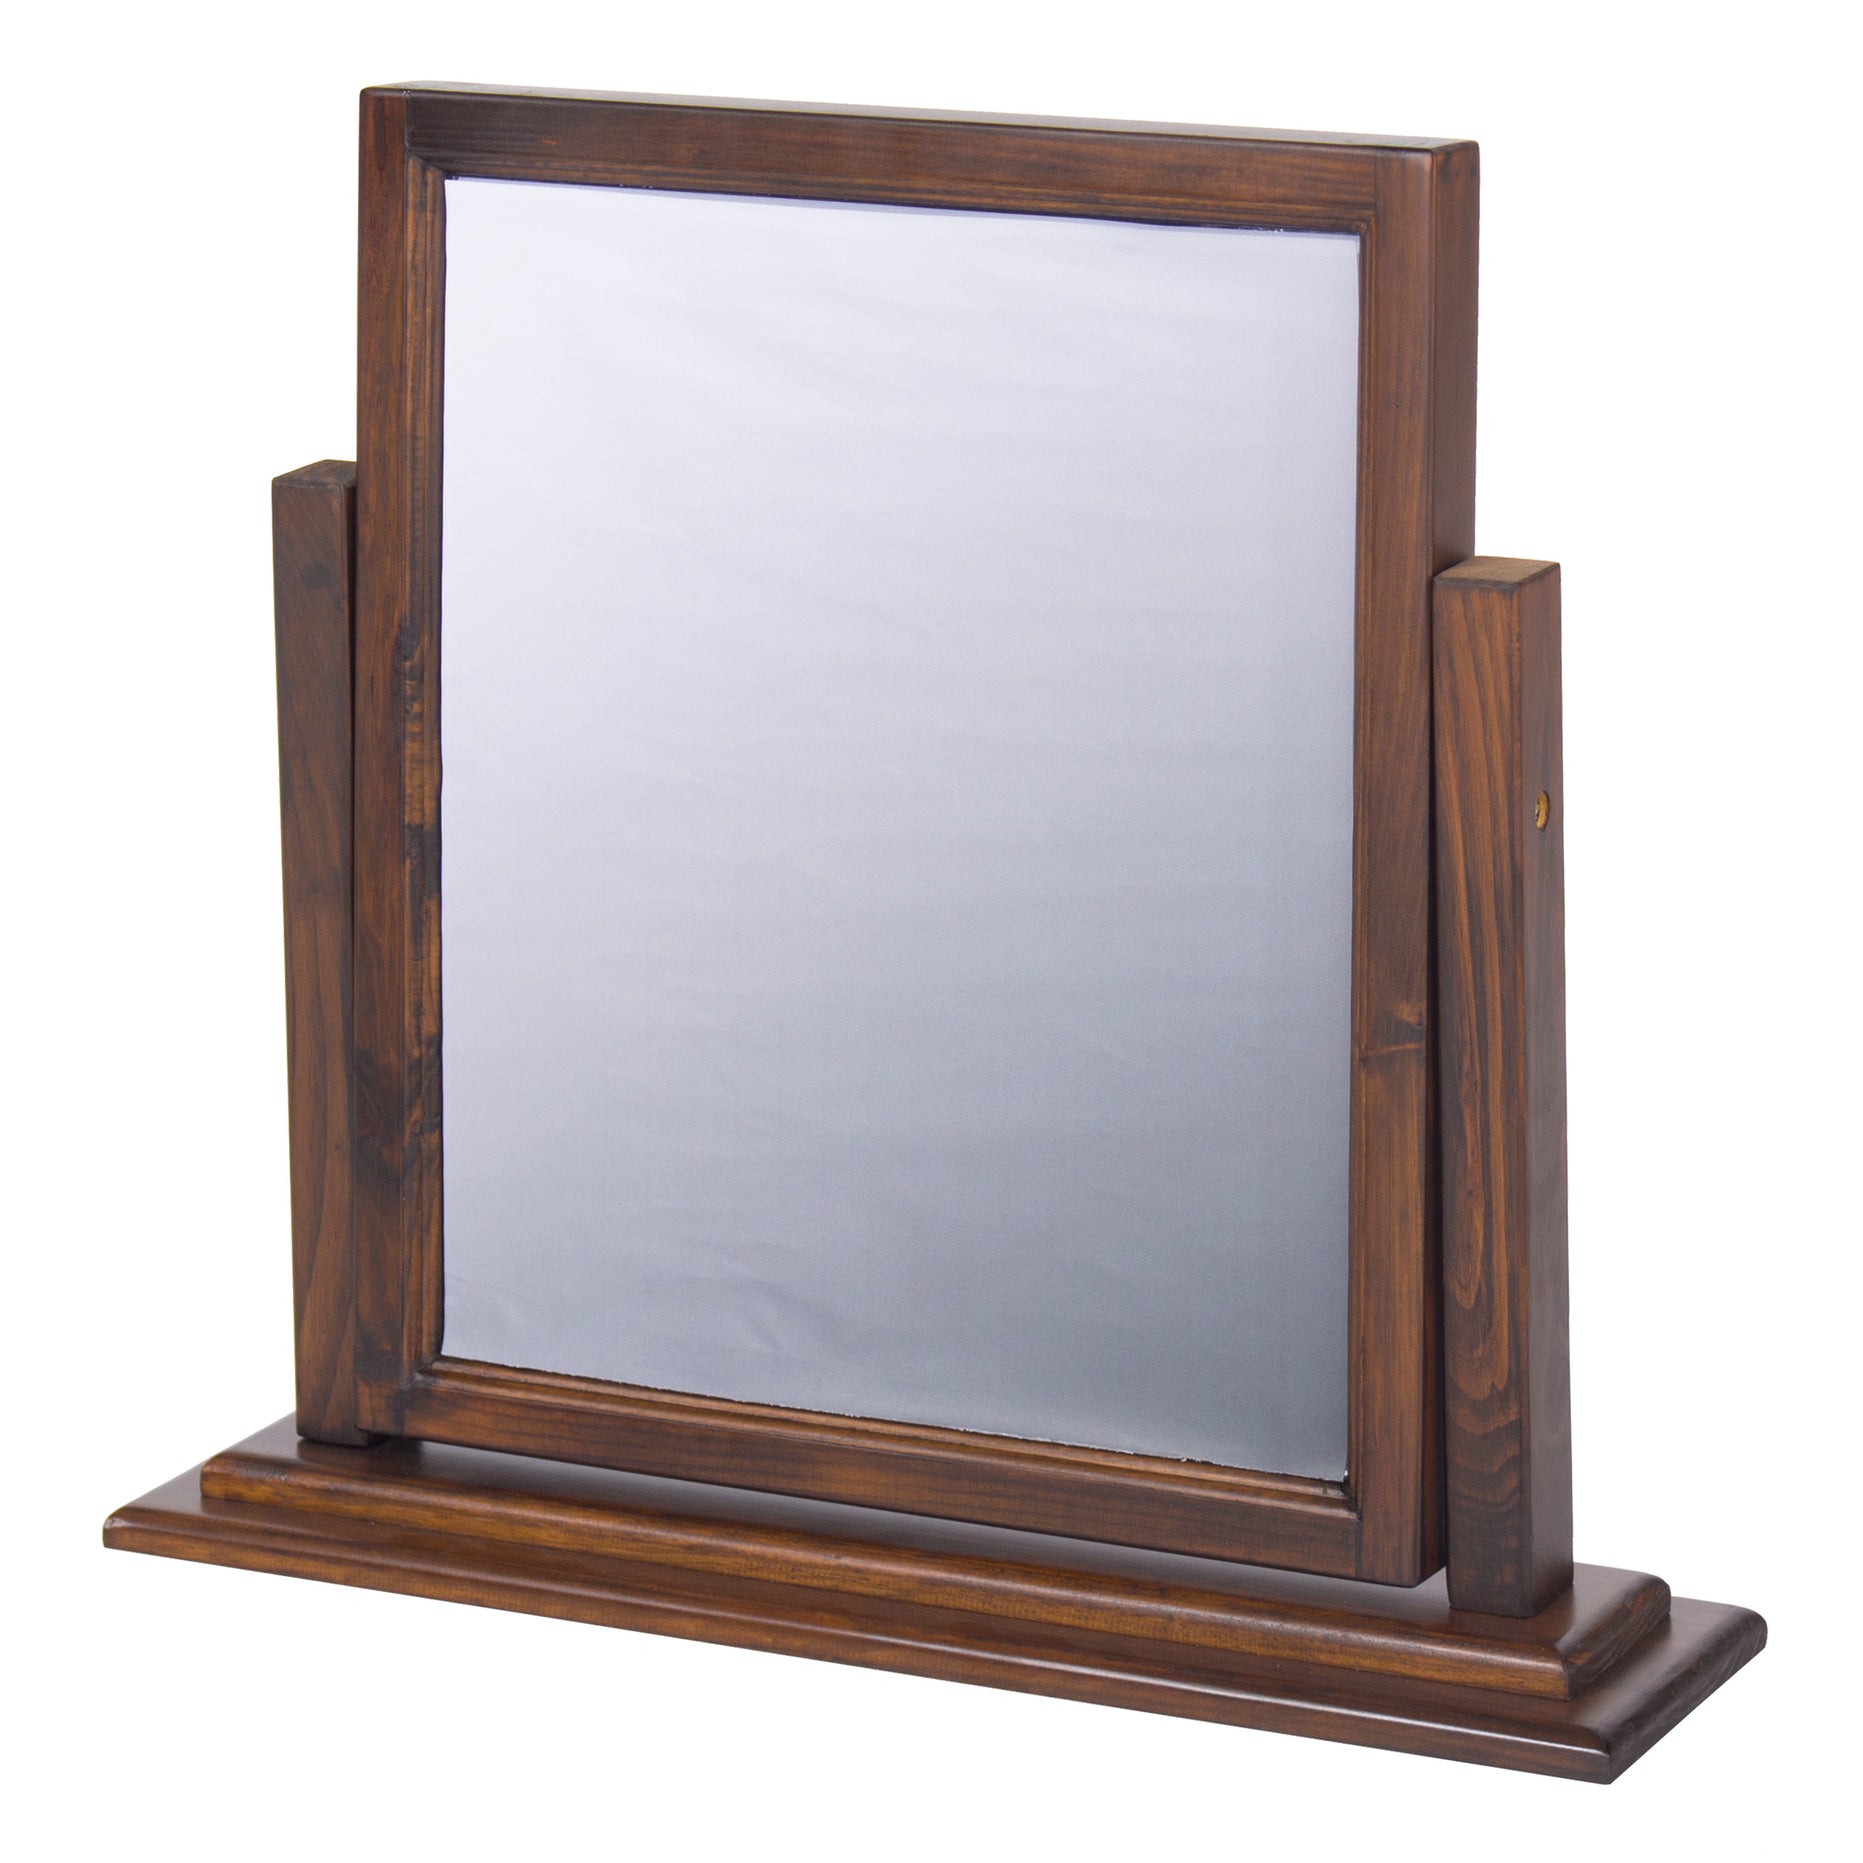 Batterson Wooden Pedestal Mirror For Core Products - CFD-BT-MR1